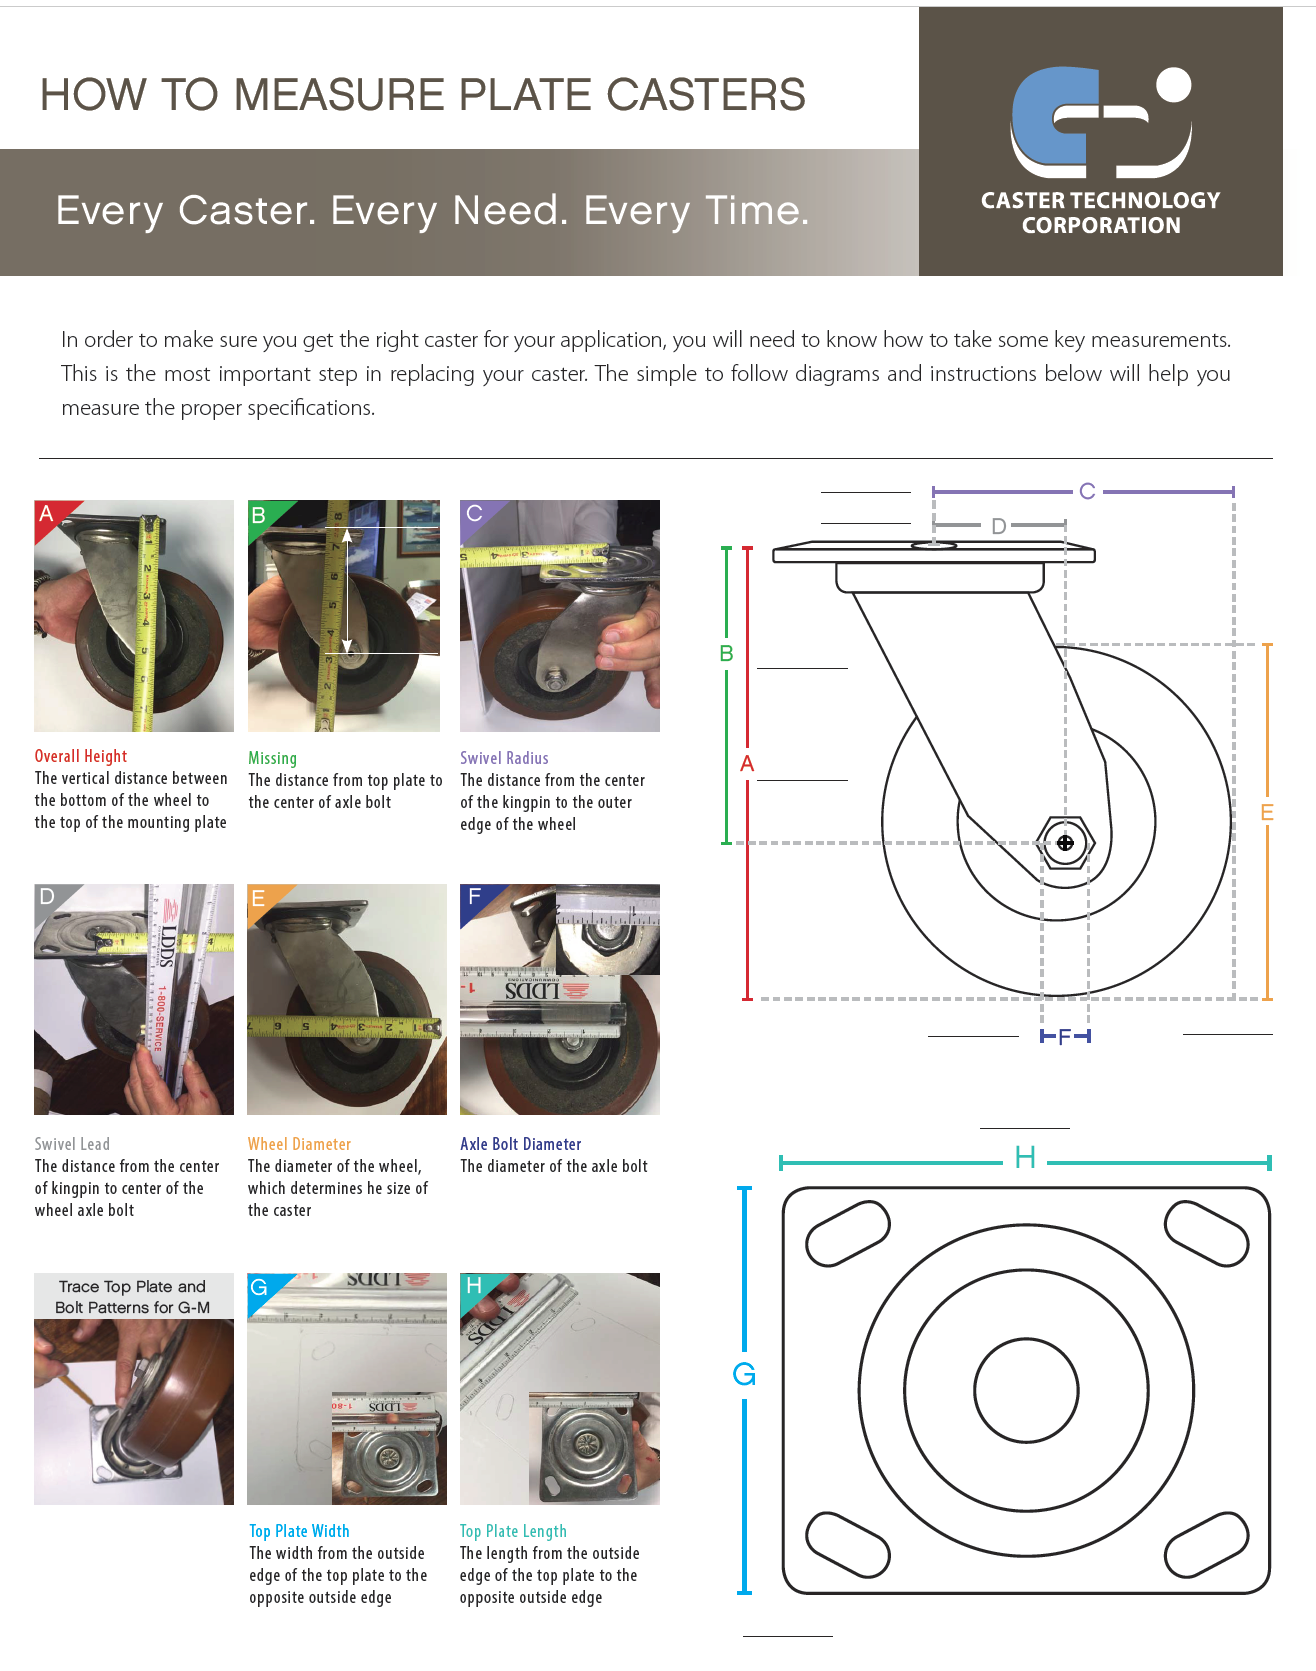 How to Measure Plate Casters